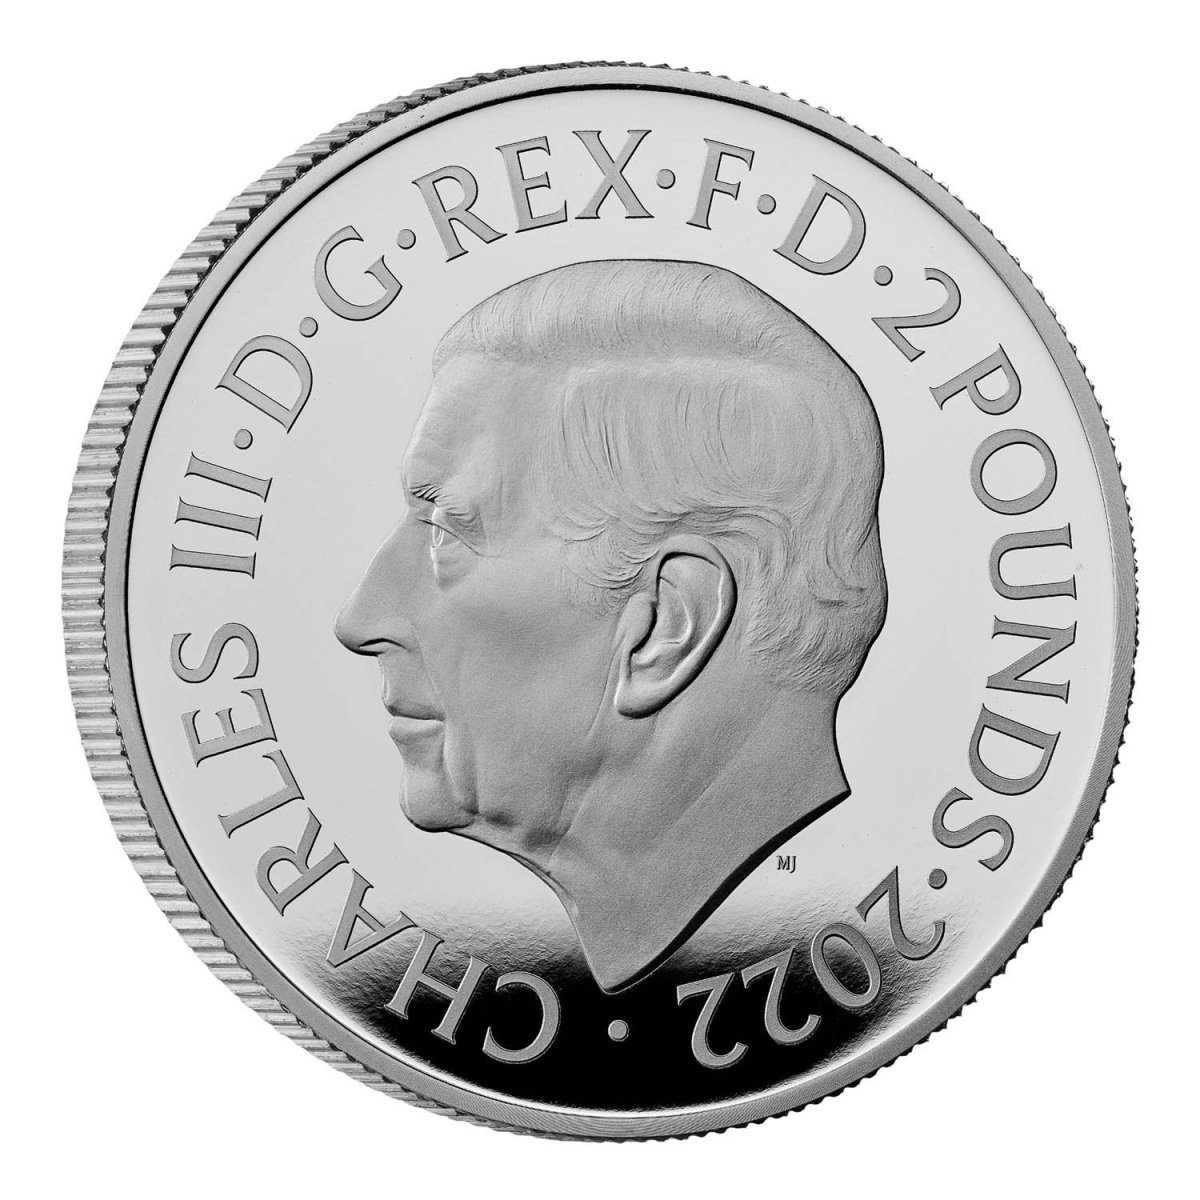 The Royal Mint released a commemorative coin series in honor of the late queen. These are the first coins to feature King Charles III's official effigy.